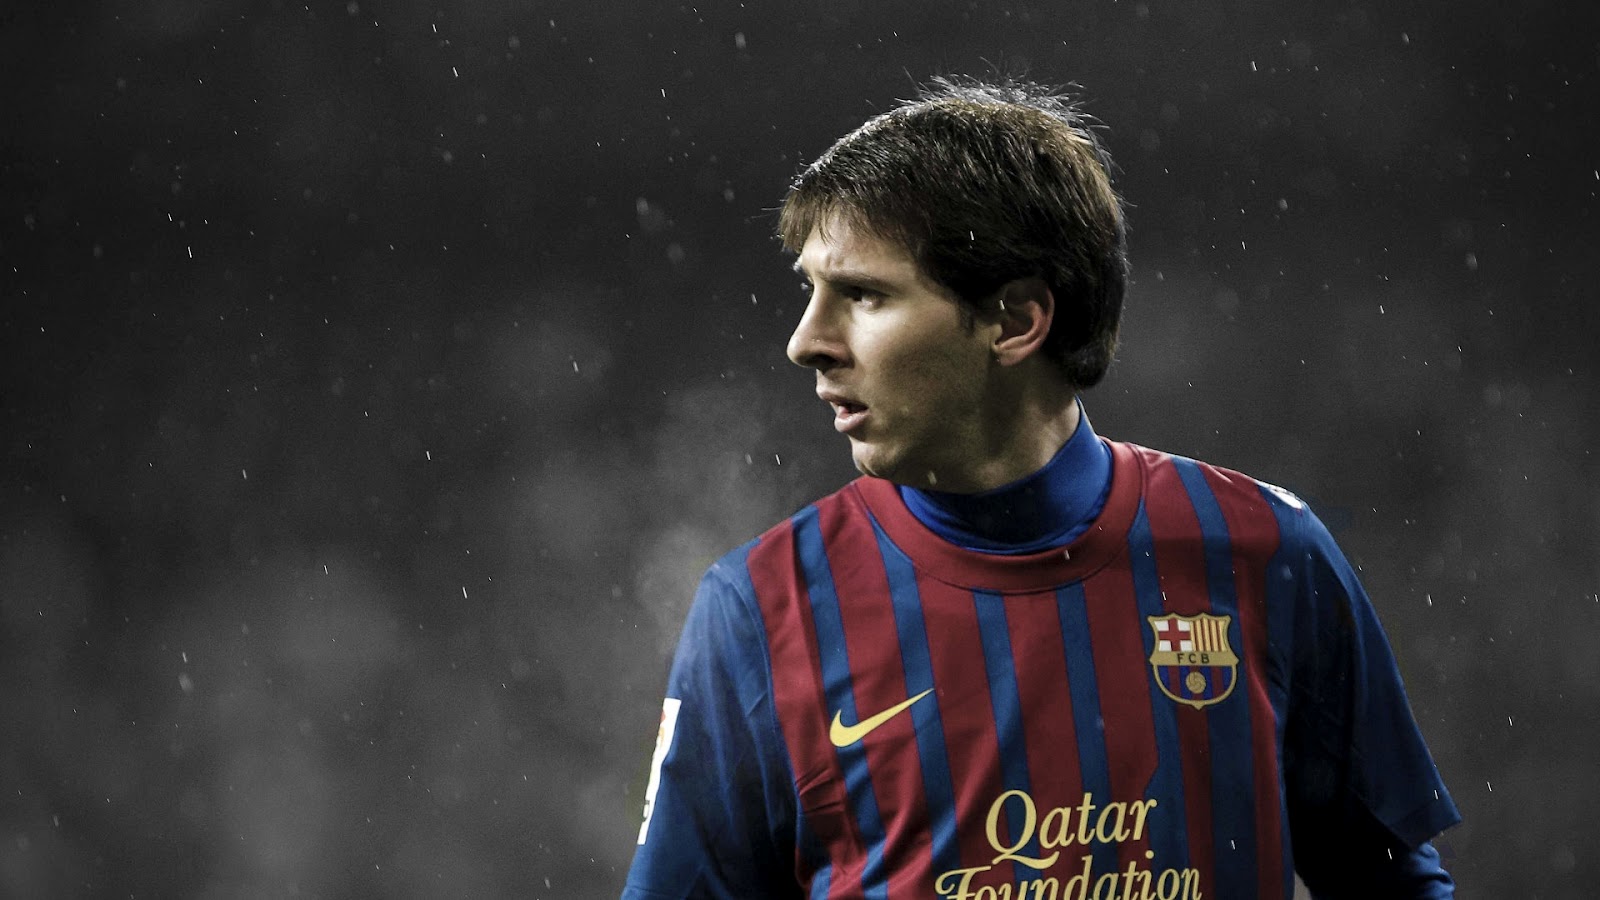 Gallery For gt Messi Wallpaper Hd